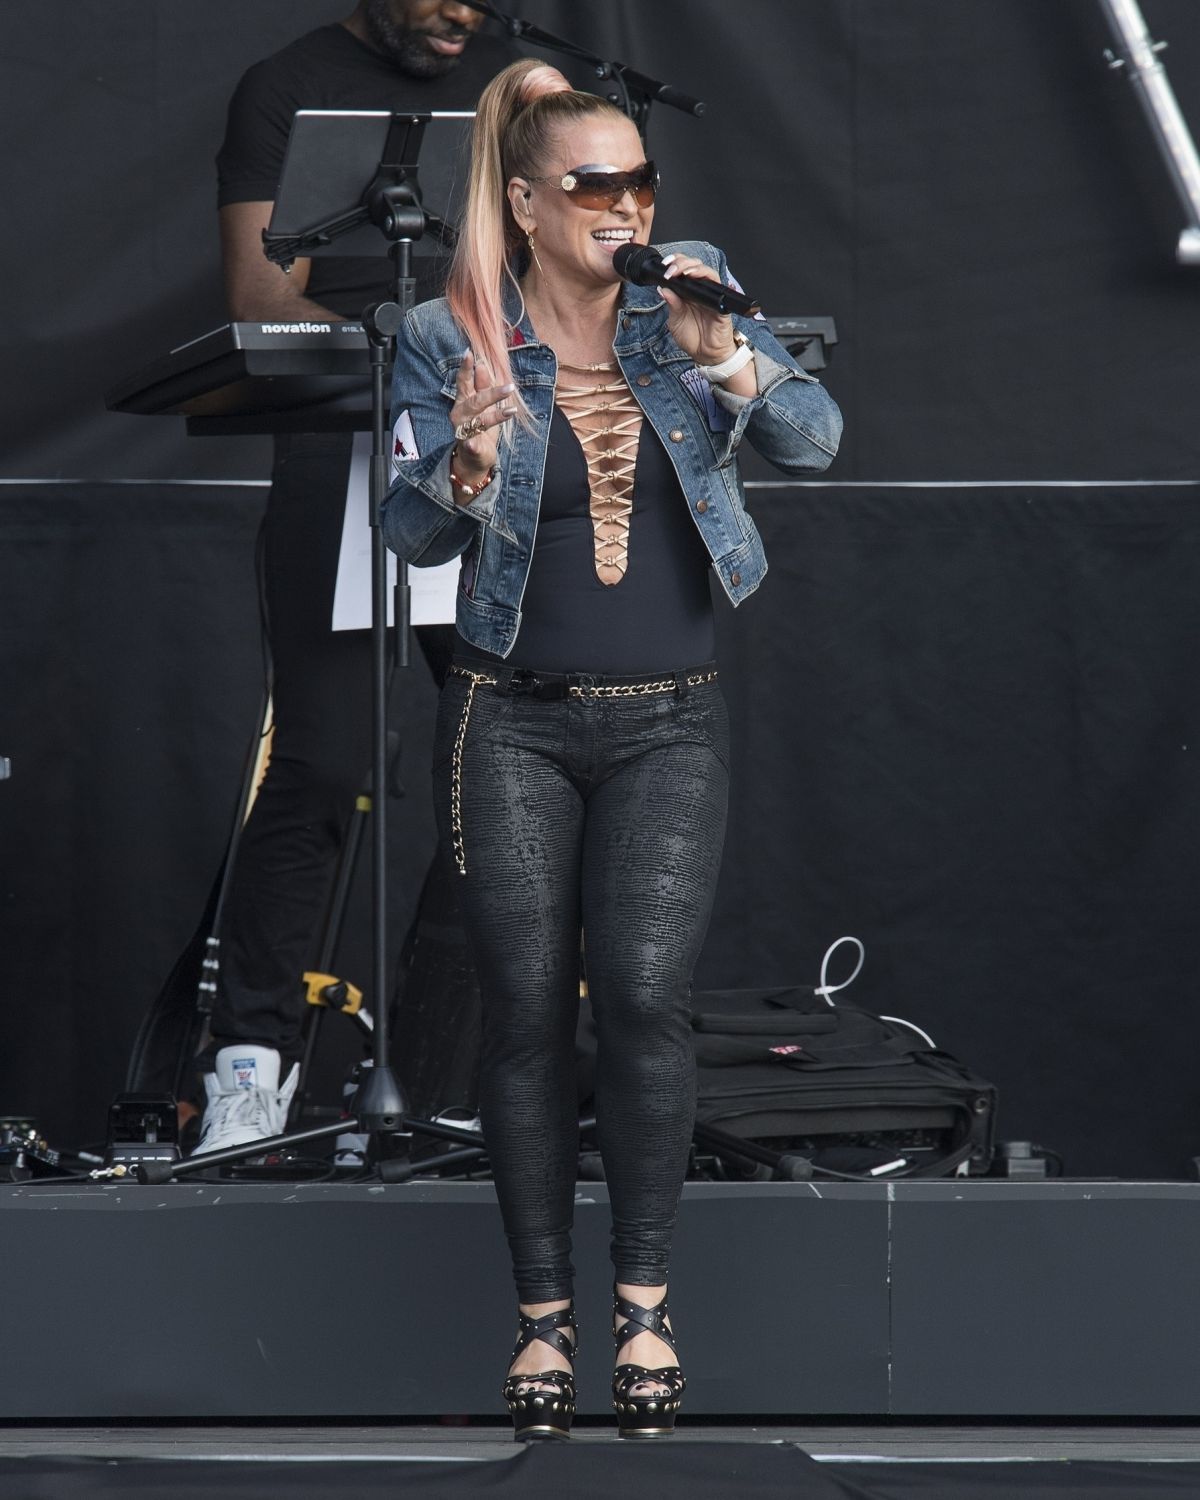 ANASTACIA Opens for Lionel Richie at Franklin’s Gardens in Northampton ...